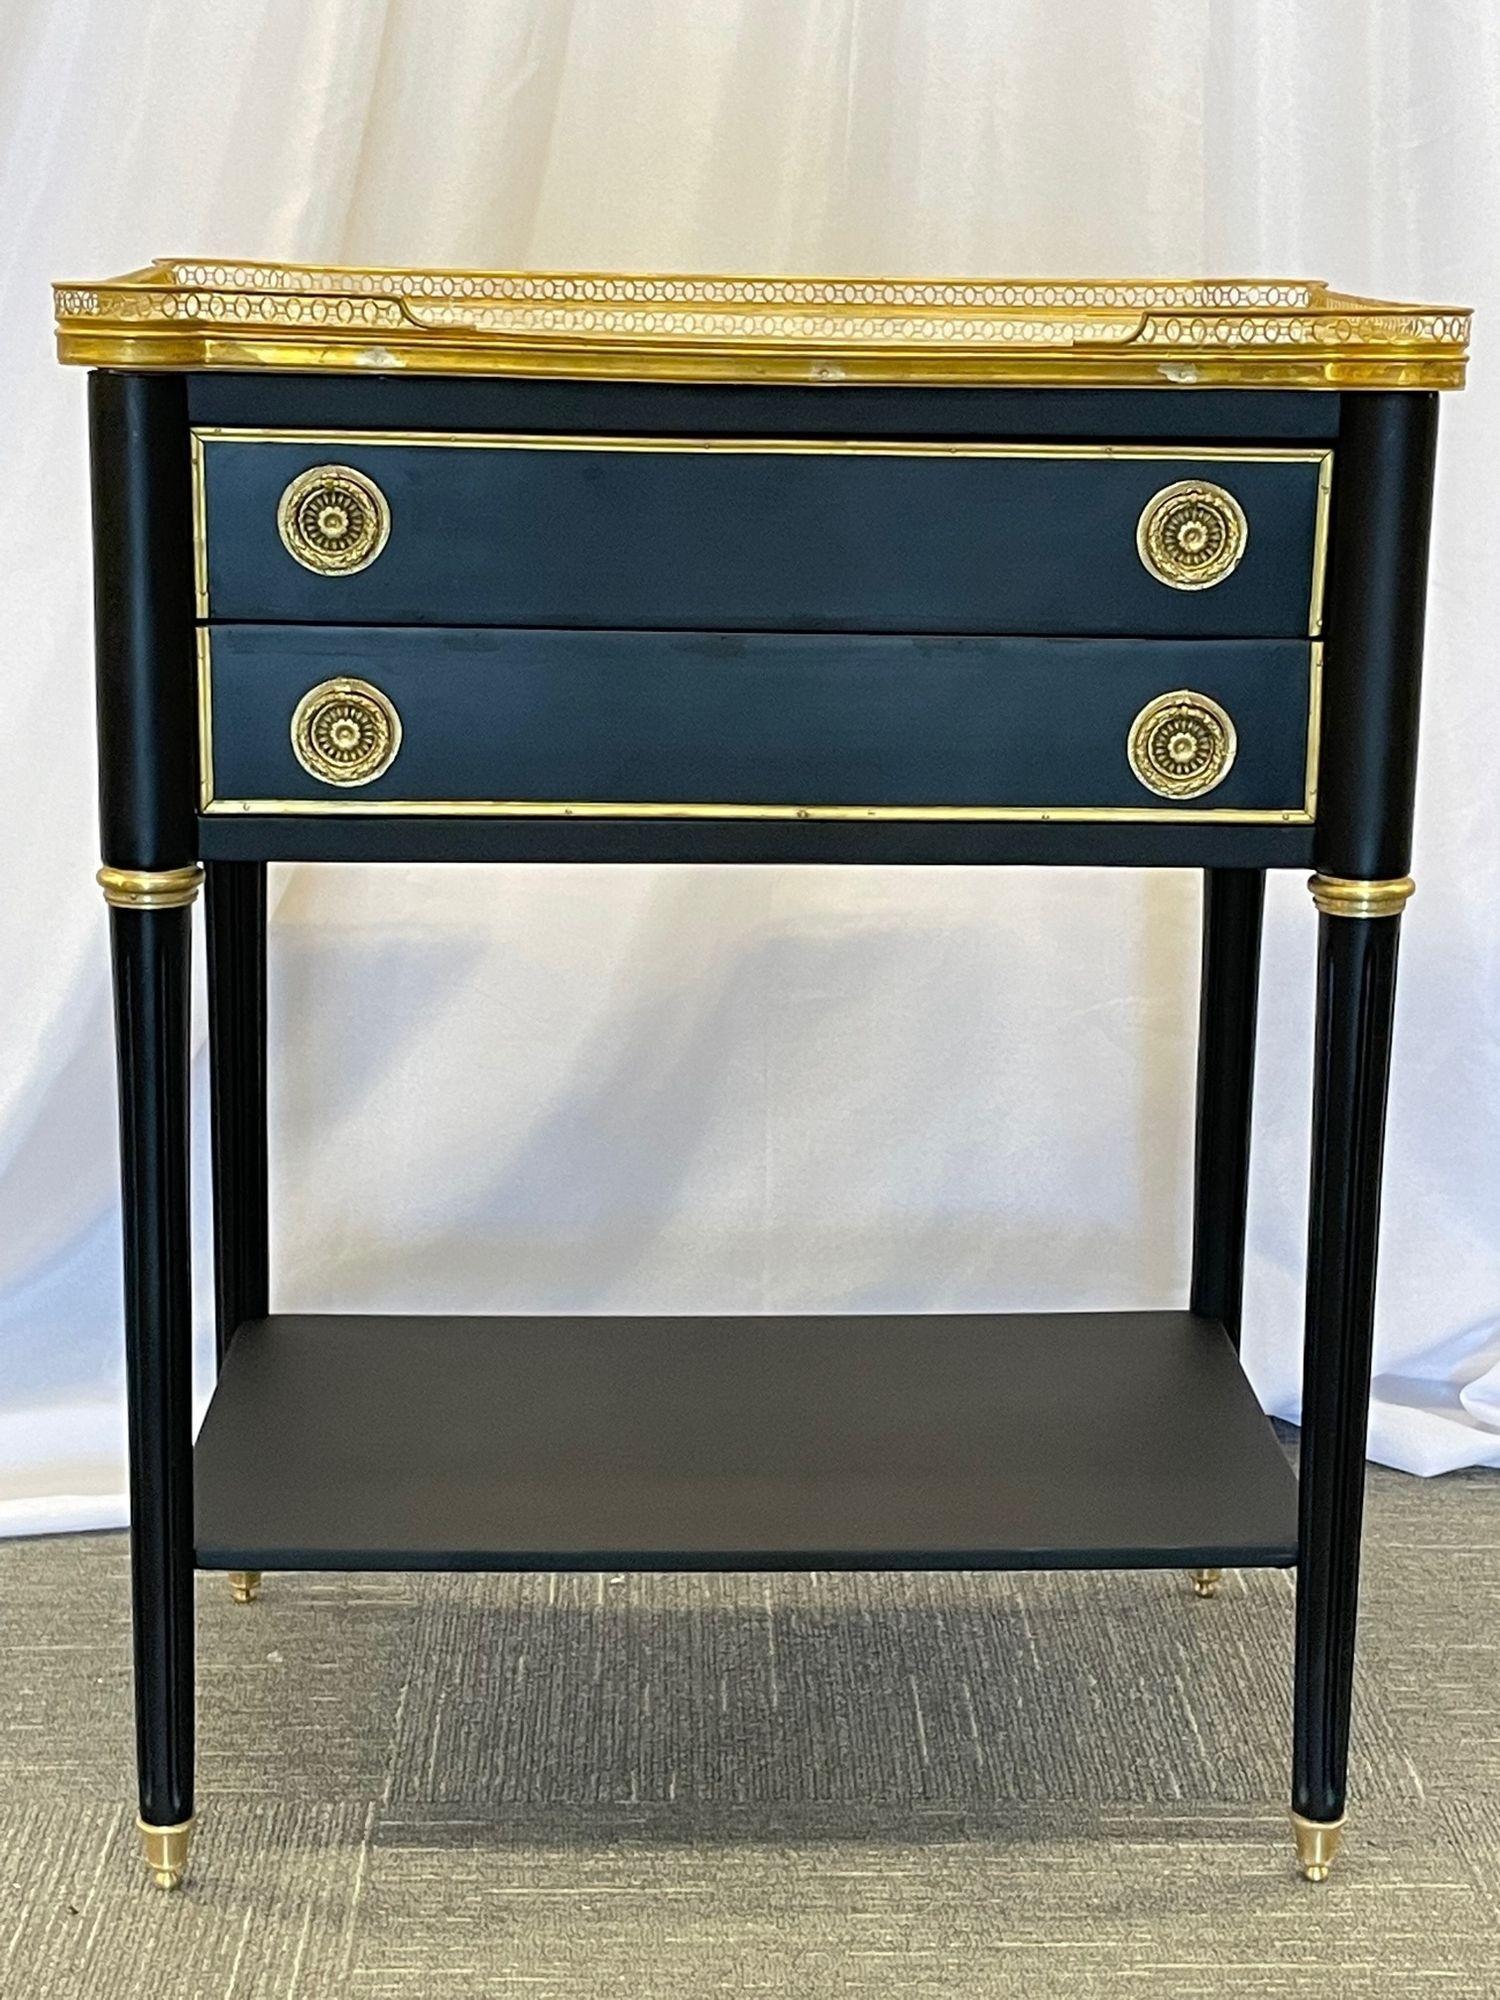 Pair of Ebony Finished Hollywood Regency or neoclassical side, lamp tables, nightstands / end tables, Manner Jansen
 
Pair of Swedish neoclassical nightstands or end tables with two drawers in the manner of Maison Jansen. These finely crafted end